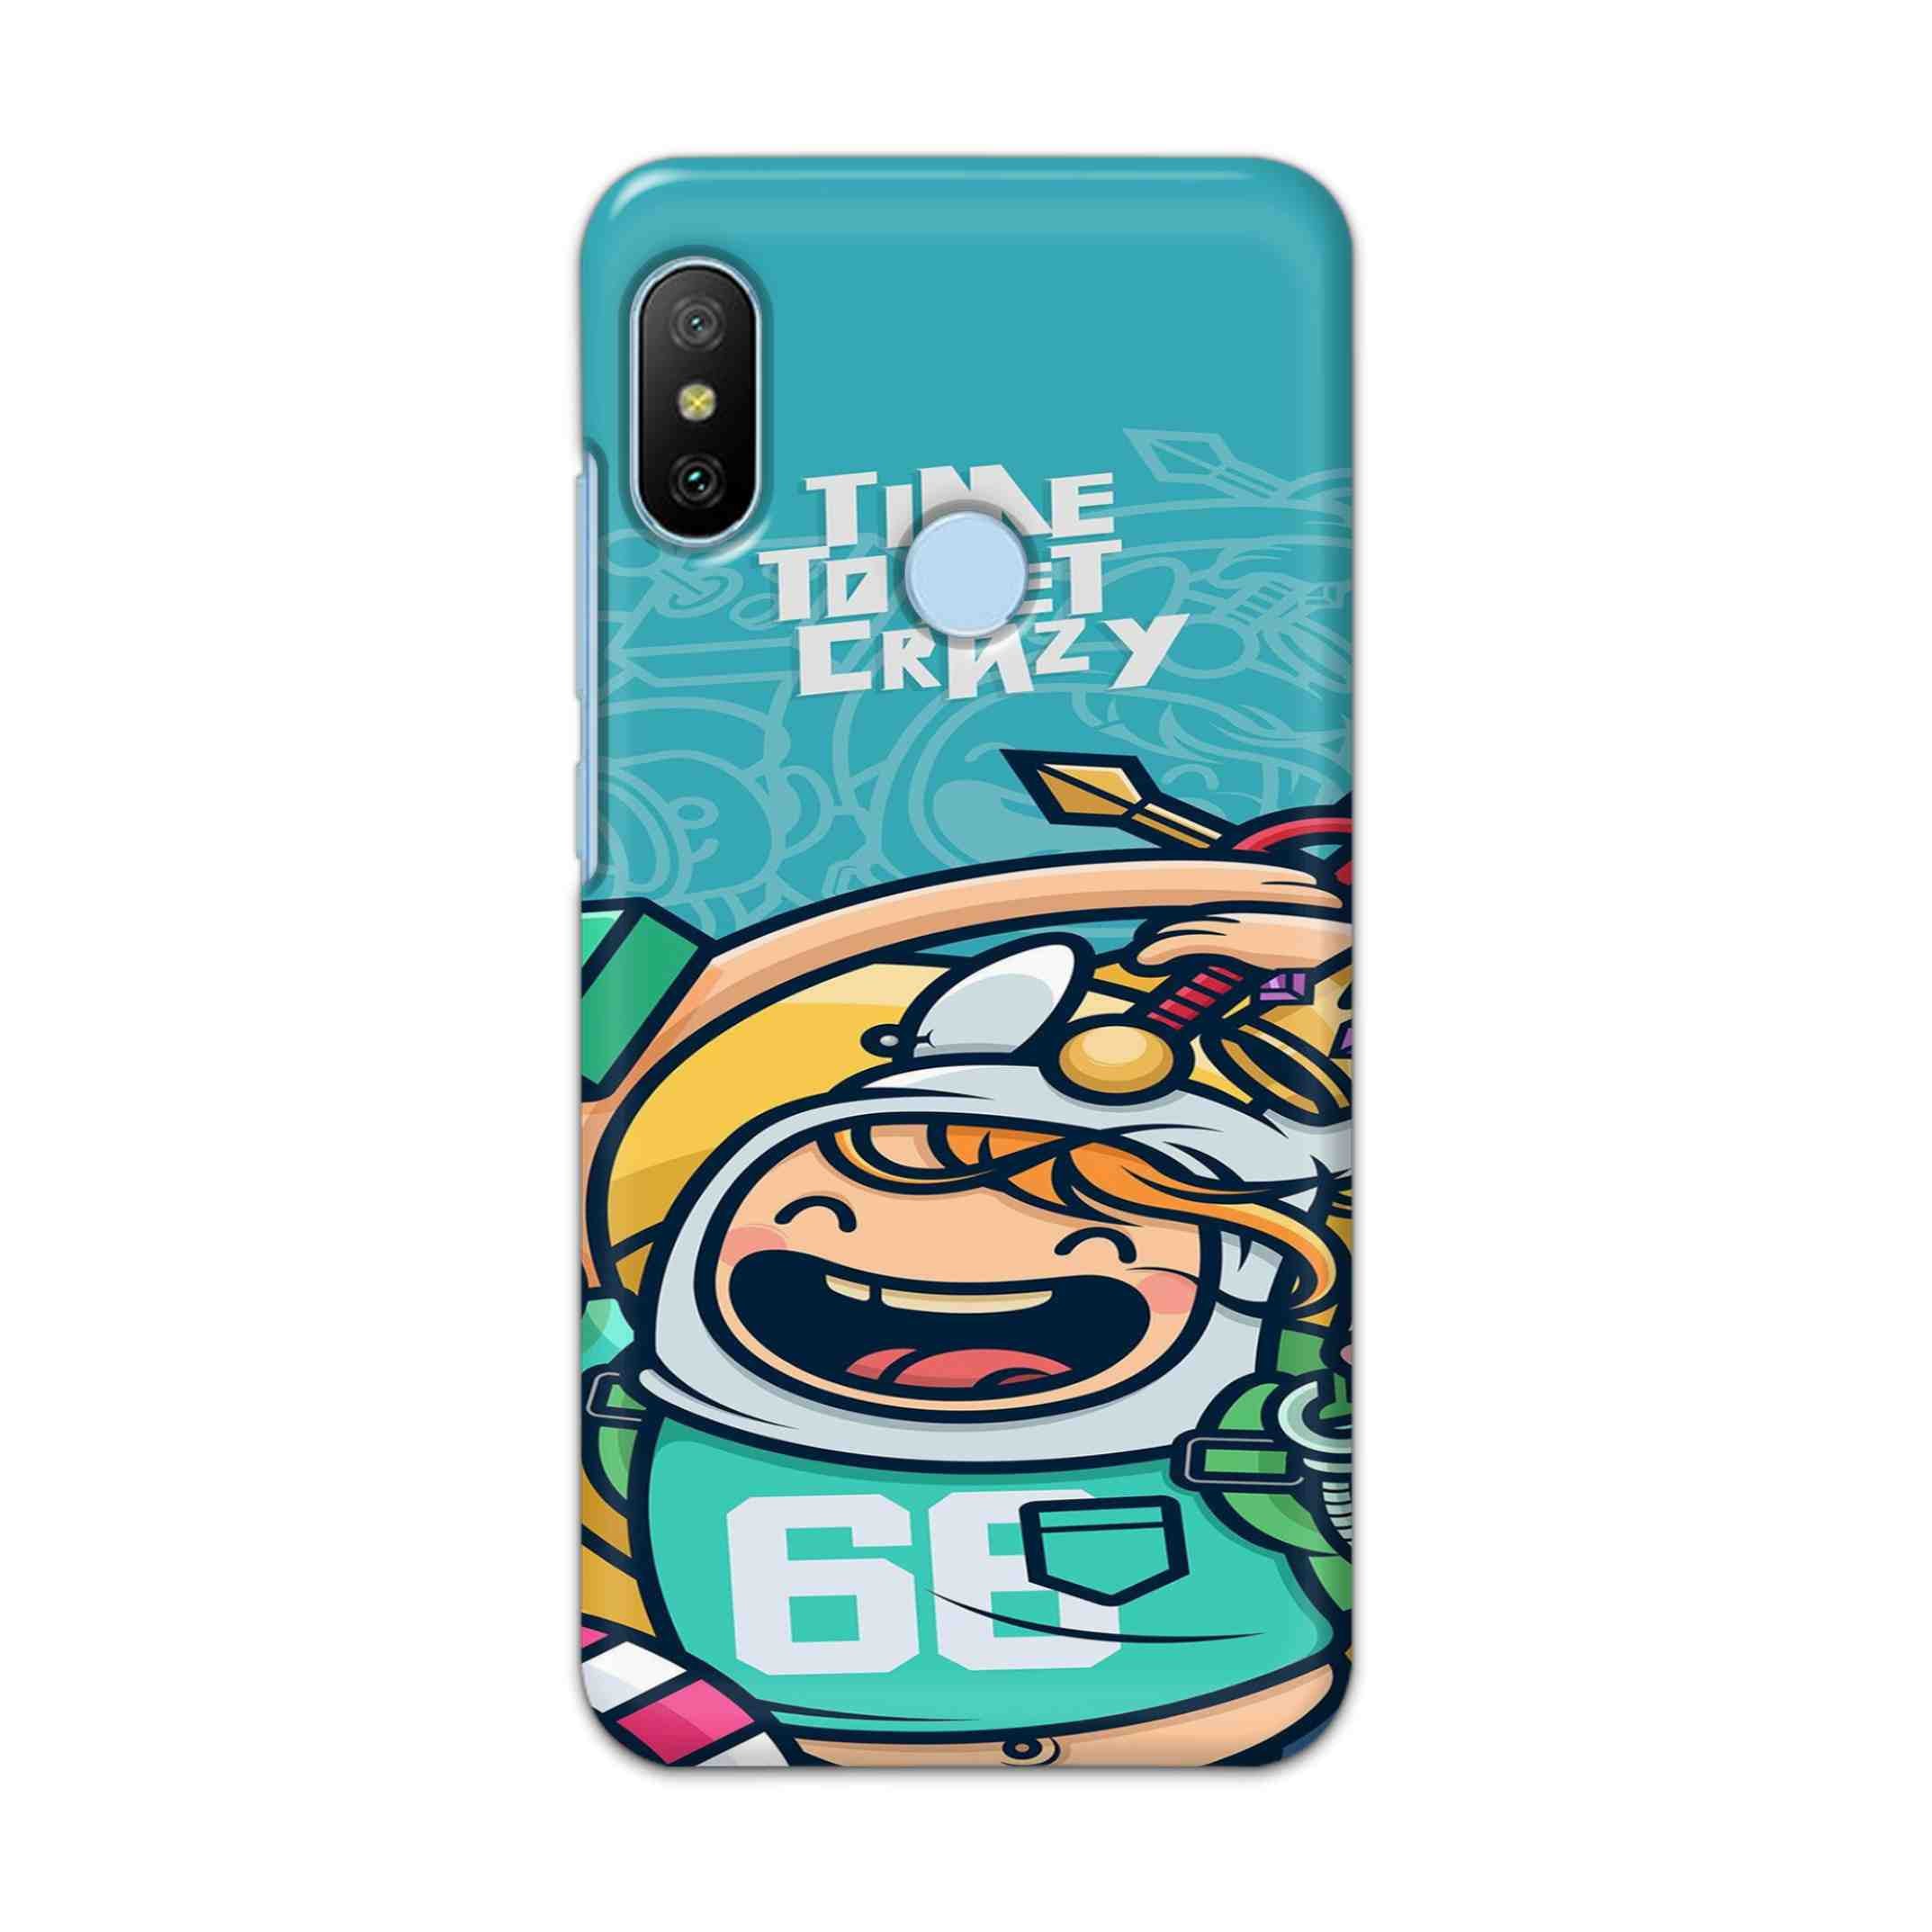 Buy Time To Get Crazy Hard Back Mobile Phone Case/Cover For Xiaomi Redmi 6 Pro Online